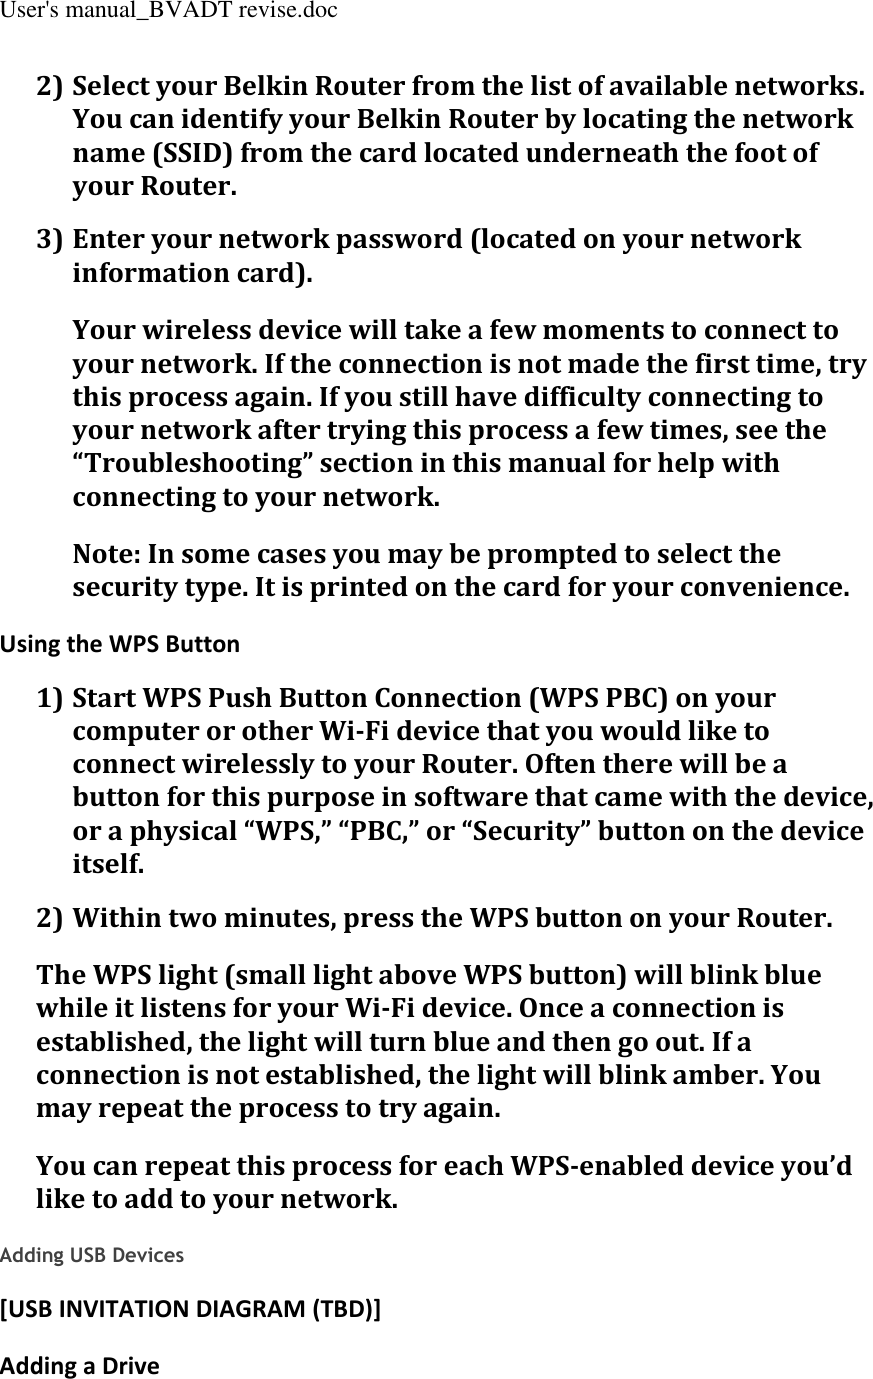 User&apos;s manual_BVADT revise.doc 2) Select your Belkin Router from the list of available networks. You can identify your Belkin Router by locating the network name (SSID) from the card located underneath the foot of your Router. 3) Enter your network password (located on your network information card). Your wireless device will take a few moments to connect to your network. If the connection is not made the first time, try this process again. If you still have difficulty connecting to your network after trying this process a few times, see the “Troubleshooting” section in this manual for help with connecting to your network. Note: In some cases you may be prompted to select the security type. It is printed on the card for your convenience. Using the WPS Button 1) Start WPS Push Button Connection (WPS PBC) on your computer or other Wi-Fi device that you would like to connect wirelessly to your Router. Often there will be a button for this purpose in software that came with the device, or a physical “WPS,” “PBC,” or “Security” button on the device itself. 2) Within two minutes, press the WPS button on your Router. The WPS light (small light above WPS button) will blink blue while it listens for your Wi-Fi device. Once a connection is established, the light will turn blue and then go out. If a connection is not established, the light will blink amber. You may repeat the process to try again. You can repeat this process for each WPS-enabled device you’d like to add to your network.  Adding USB Devices [USB INVITATION DIAGRAM (TBD)] Adding a Drive 